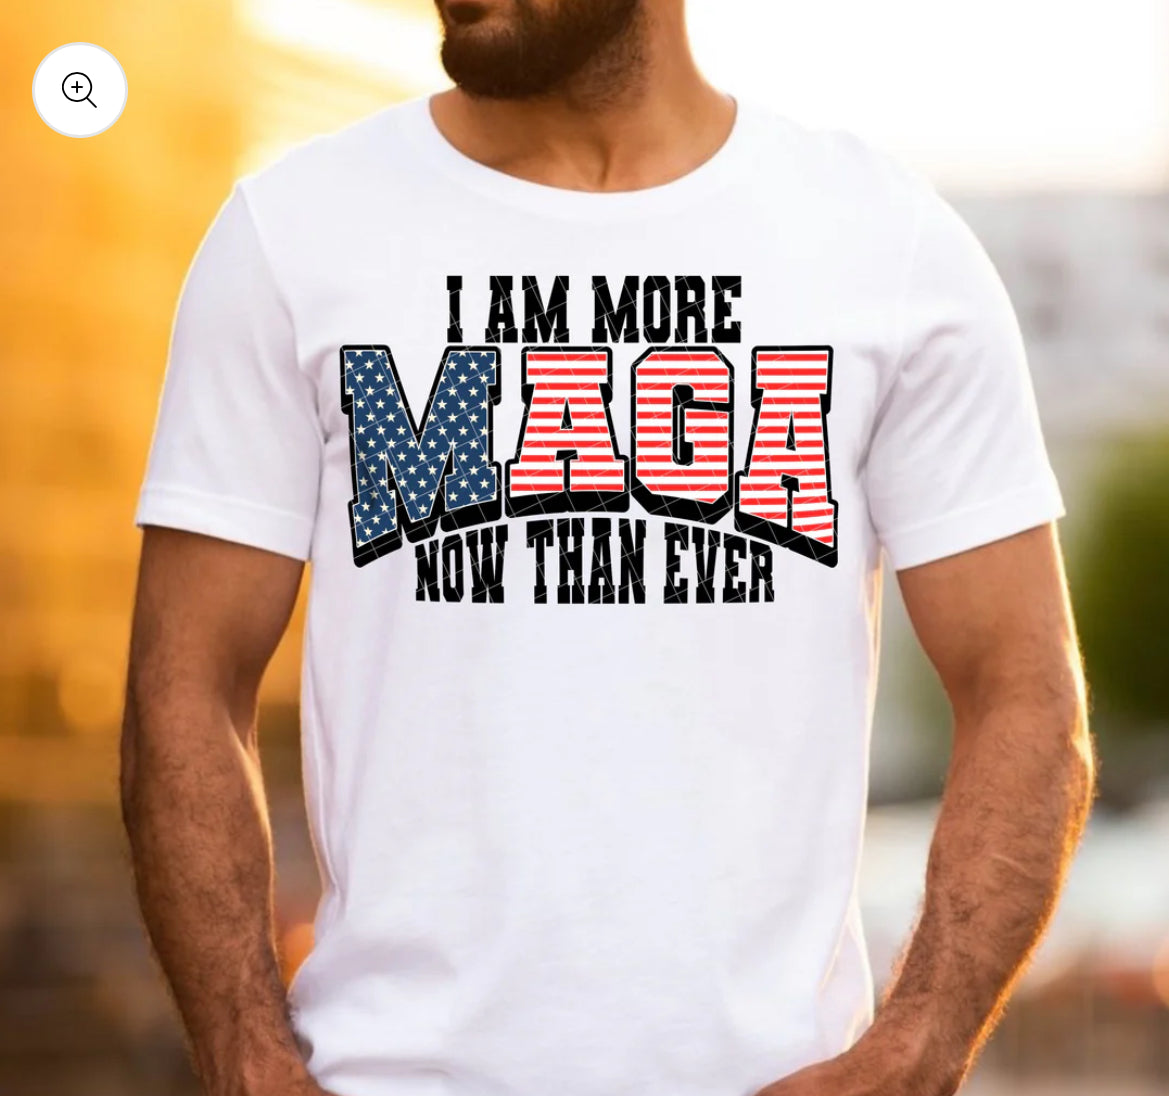 PRE-ORDER: I am more MAGA now than ever Graphic Tee